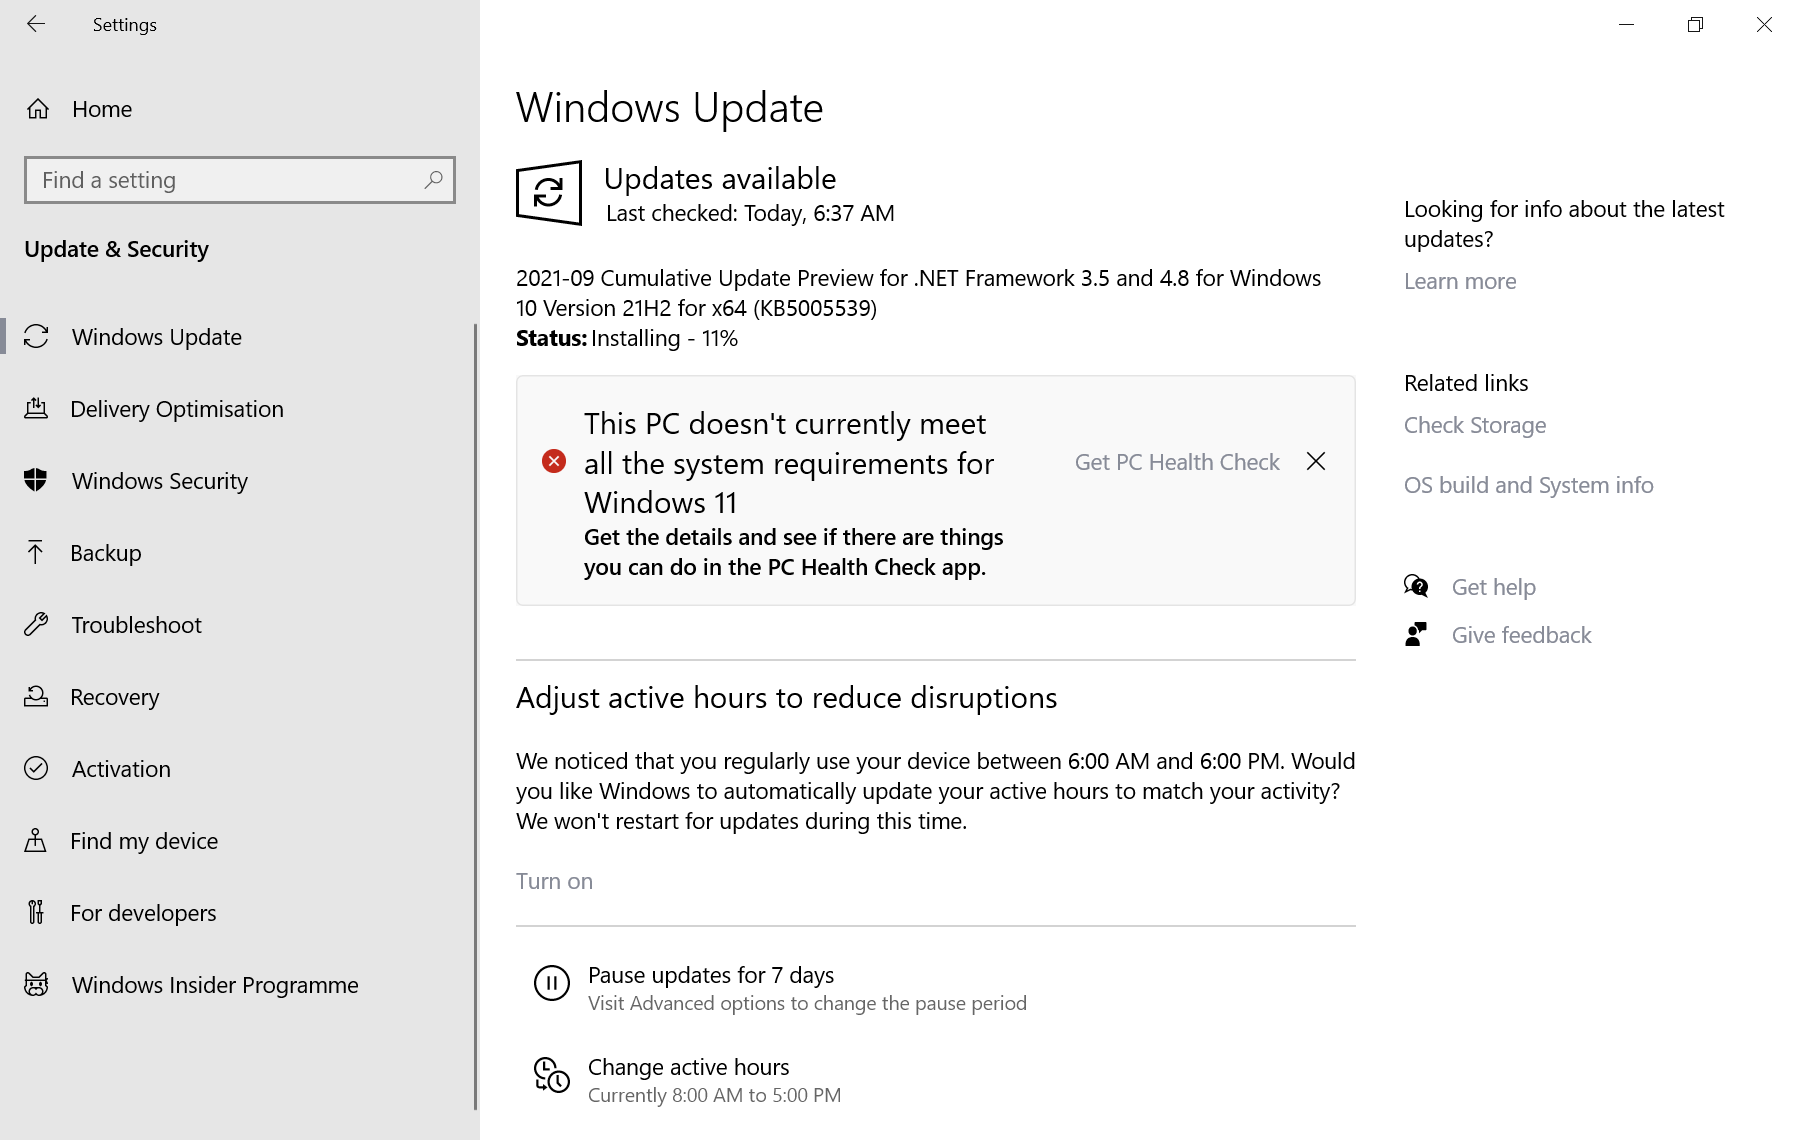 Your PC is compatible with Windows 11, but you get an error in Windows Update? Microsoft is working on a fix!